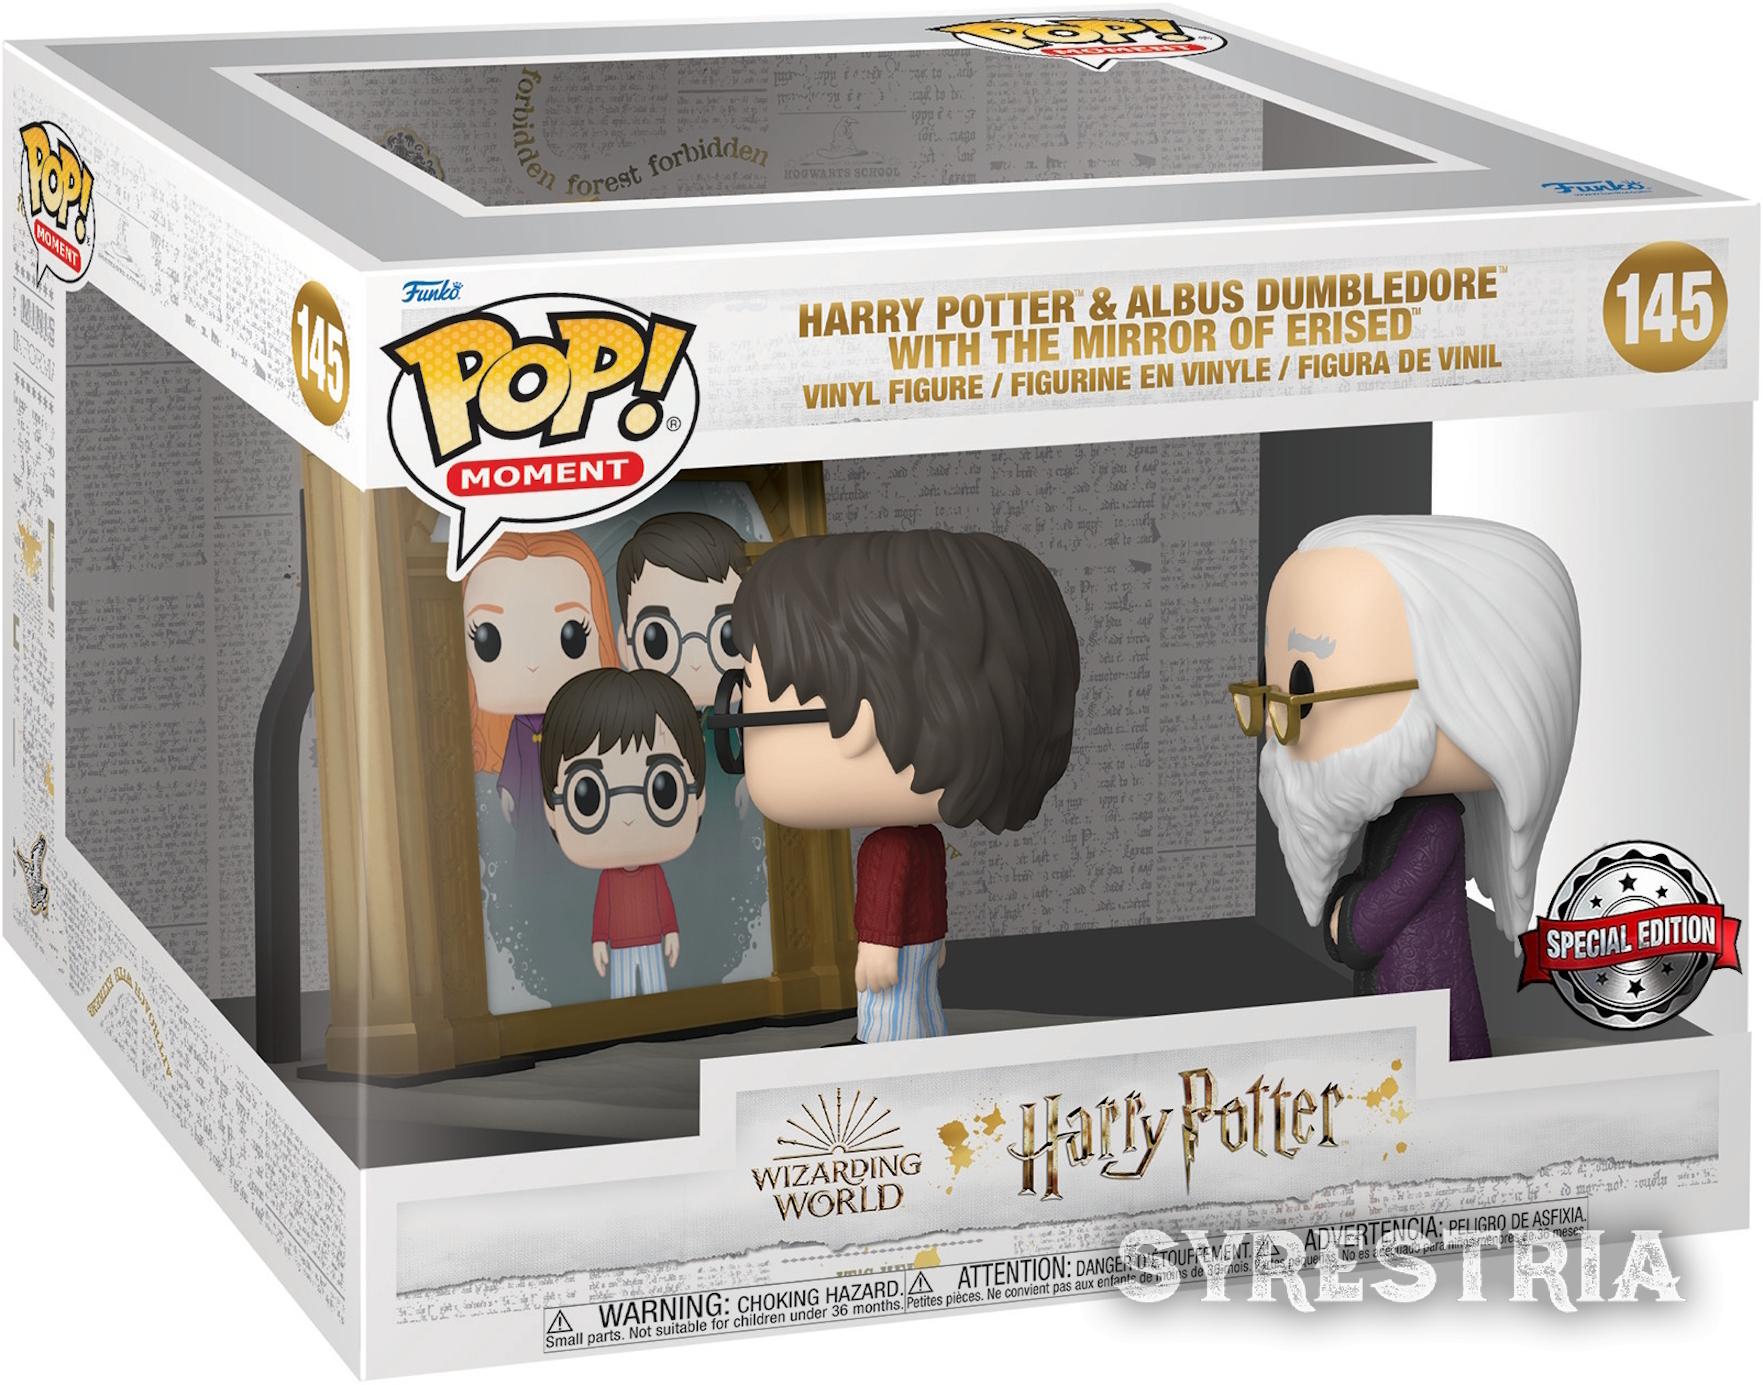 Harry Potter & Albus Dumbledore with the mirror of erised 145  Special Edition - Funko Moments Pop!